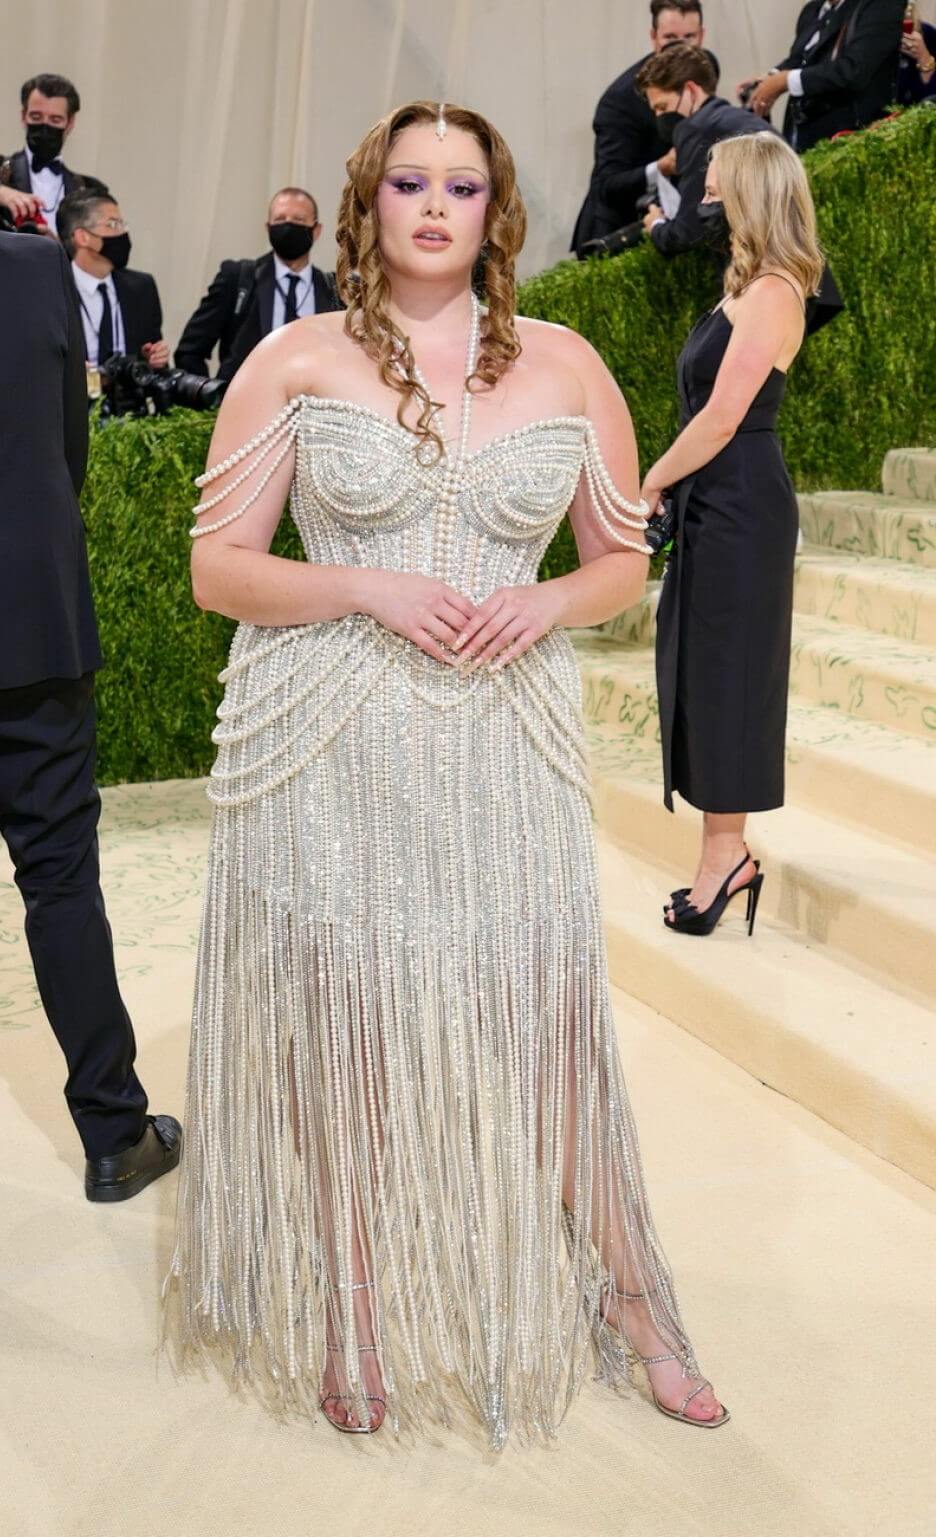 Barbie Ferreira In White Pearl Design Strapless With Fringing Style Long Dress At Met Gala